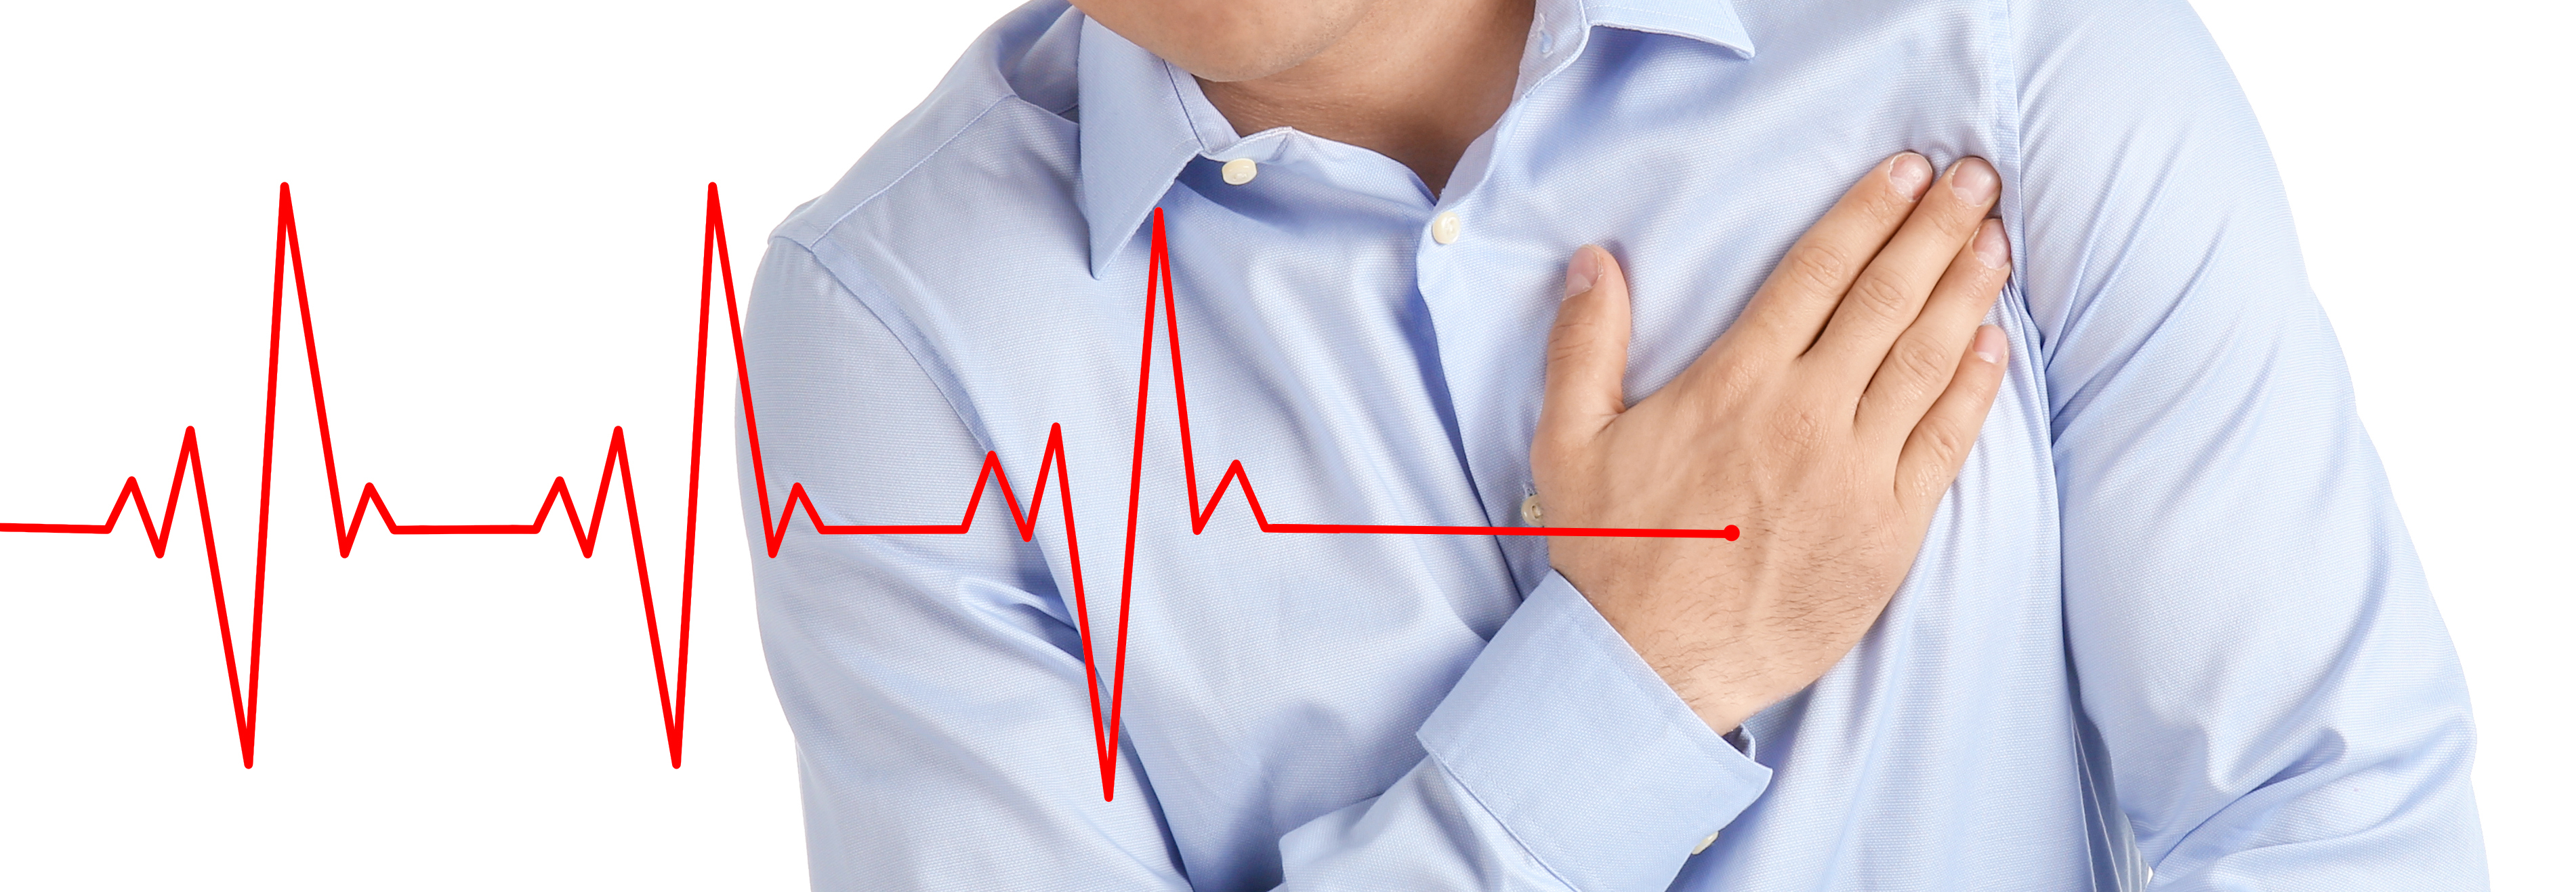 Why Patients with Anxiety and Palpitations Mistakenly Believe They're Having a Heart Attack